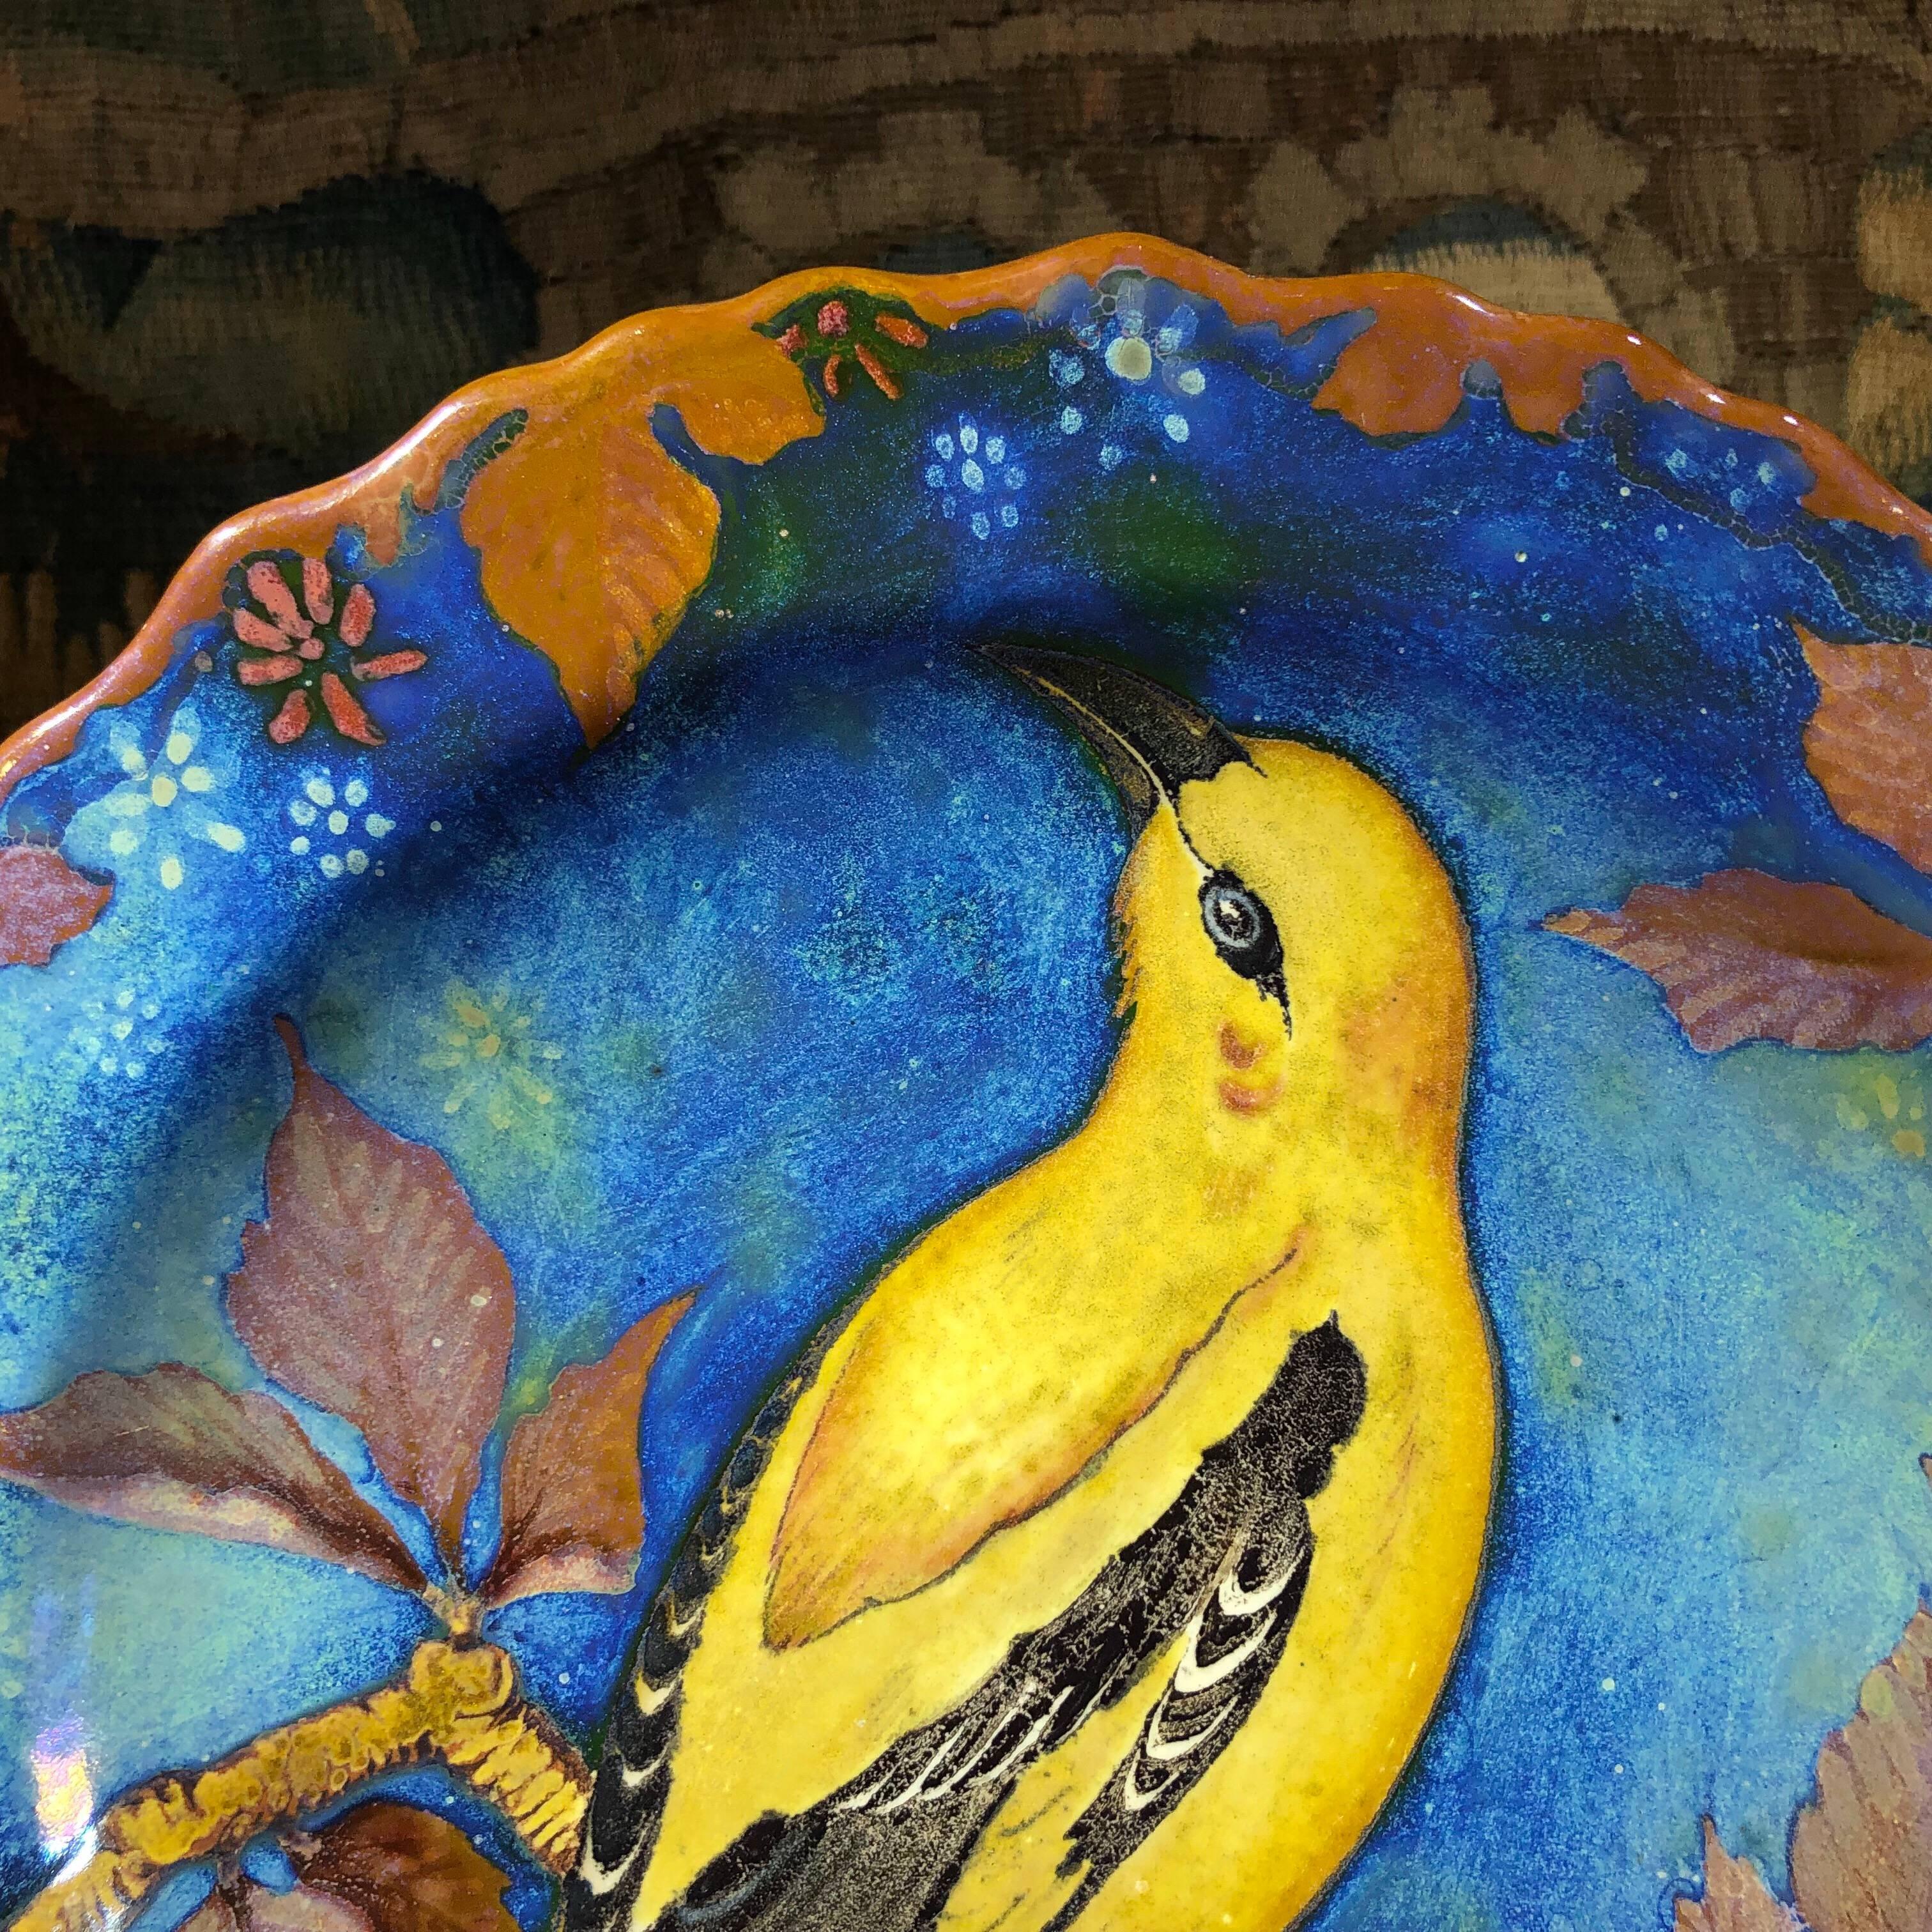 Gouda charger, the shallow lobed rim form with large slip painting of a yellow bird on branches. Extensive marks including 'UNIQUE / PLAZUID' painters mark JvS for circa 1935

References: Johannes van Schaick was a designer with Gouda 1920-51, and